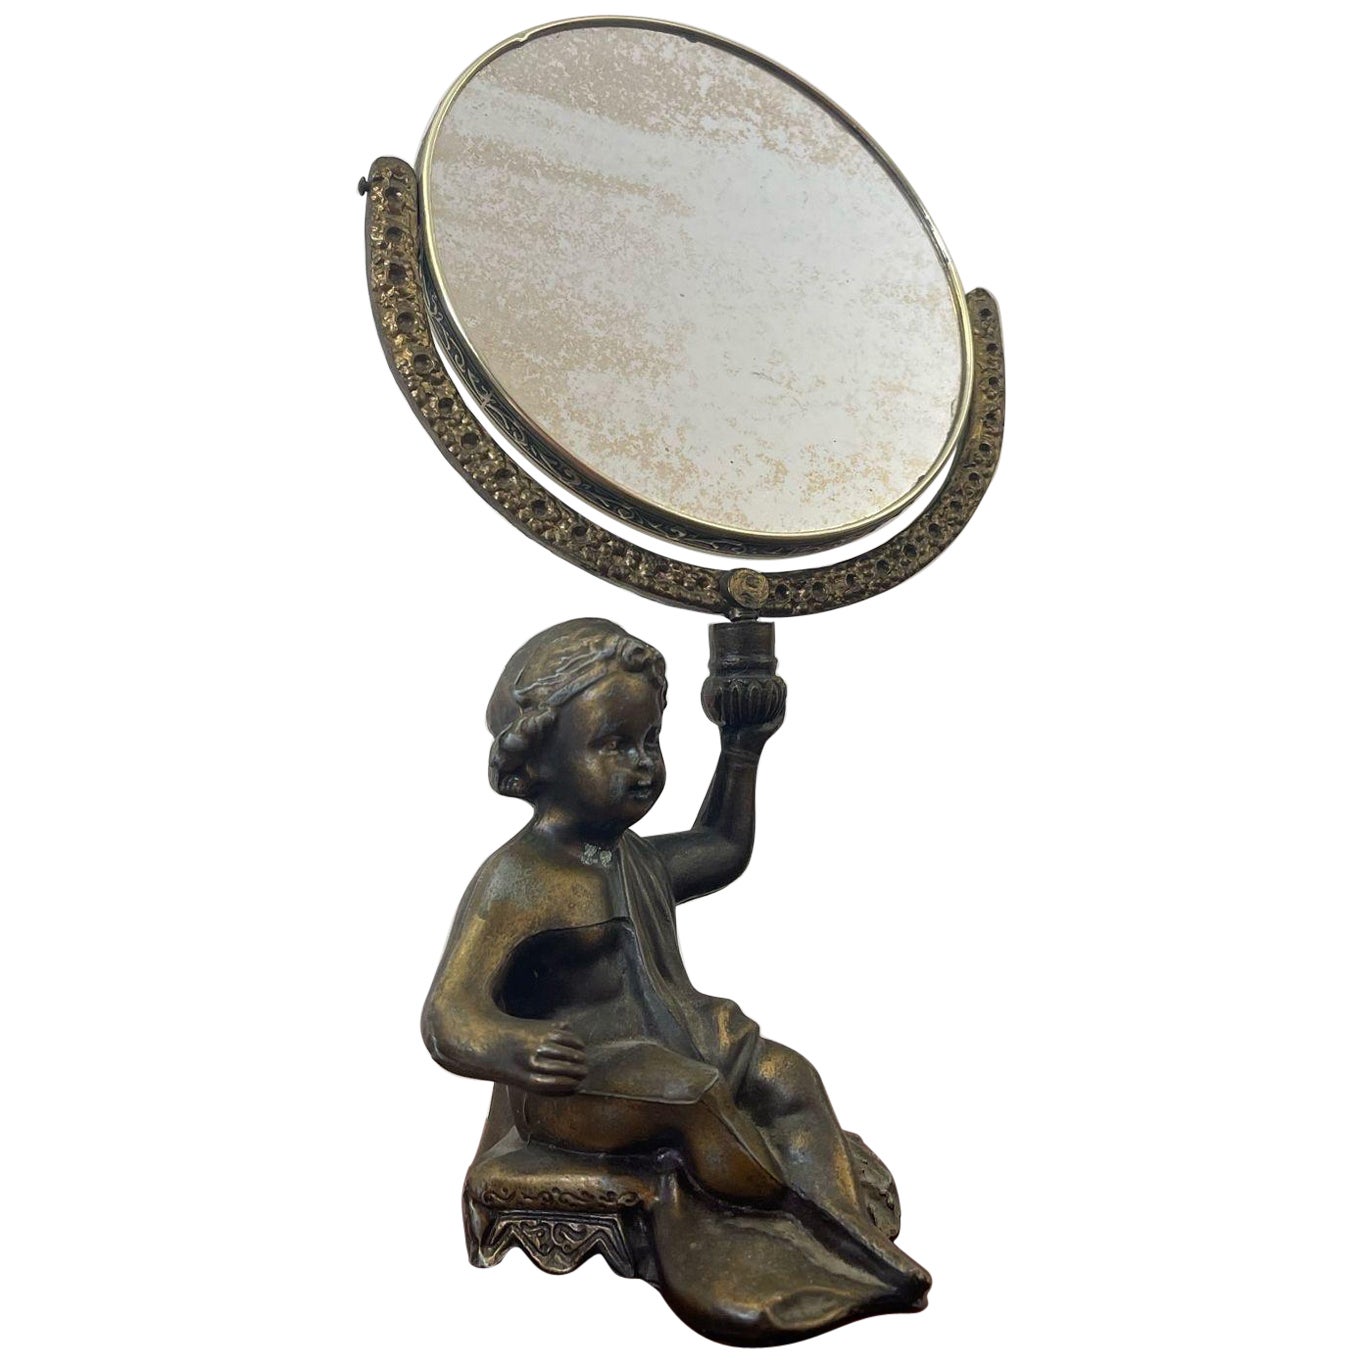 Vintage French Style Double Sided Vanity Mirror With Cherub Sculpture Stand. For Sale